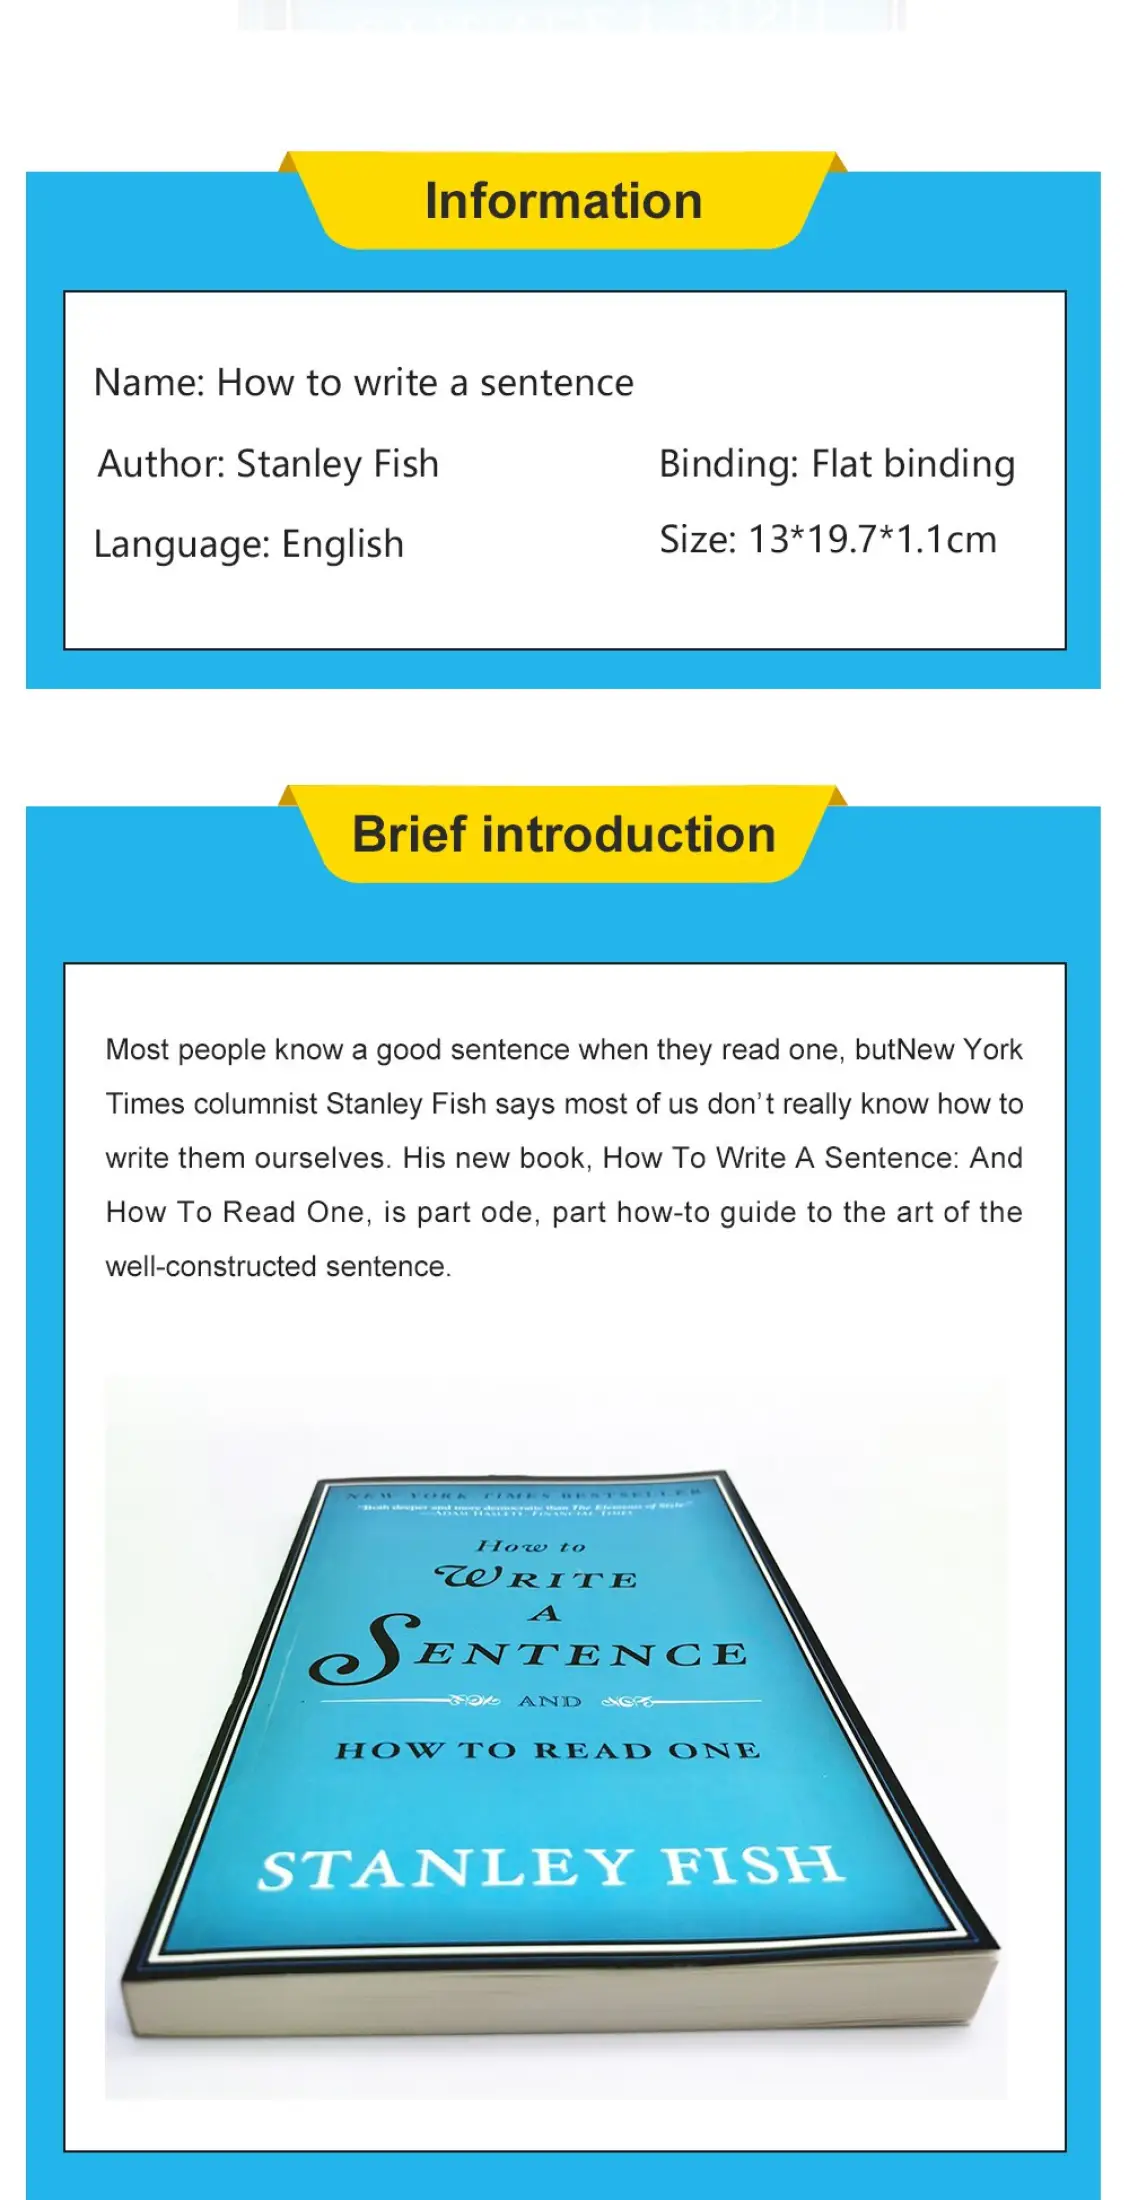 How To Write A Sentence and How To Read One By Stanley Fish